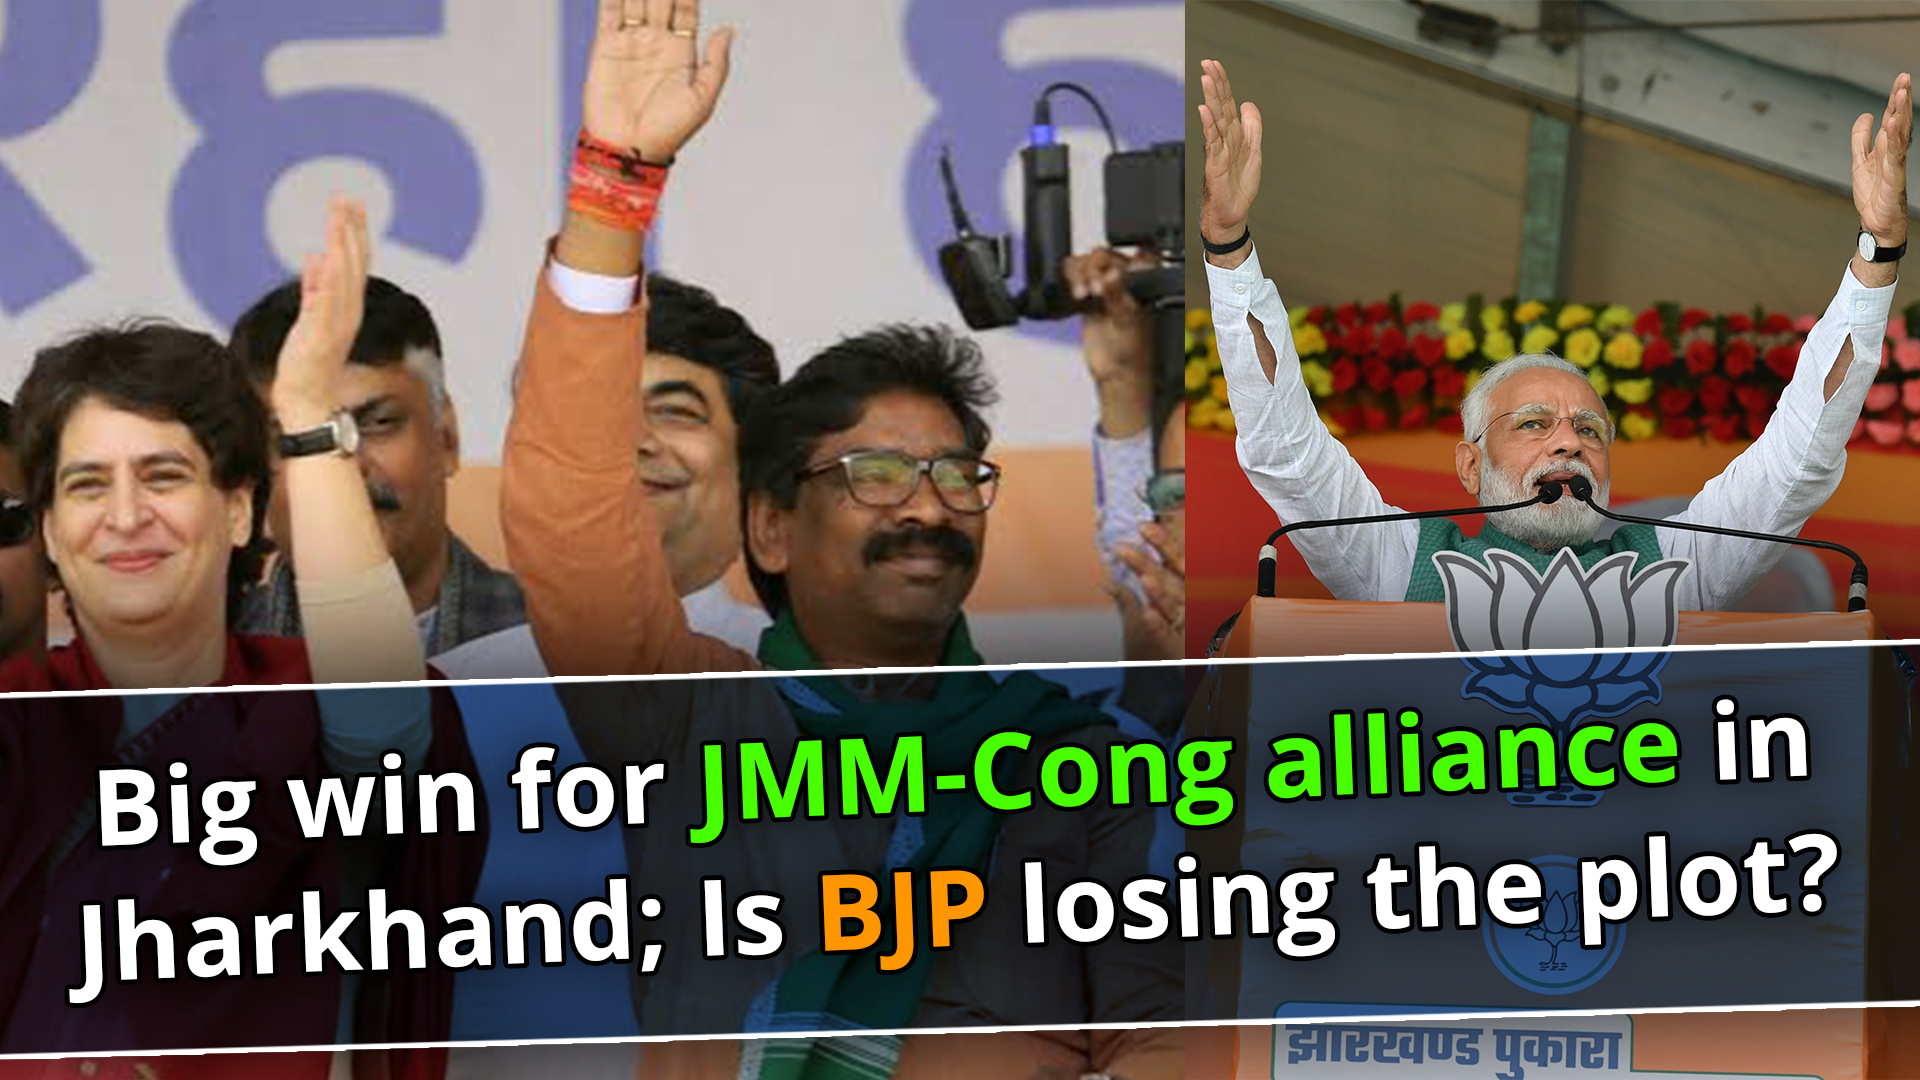 Big win for JMM-Cong alliance in Jharkhand; Is BJP losing the plot?